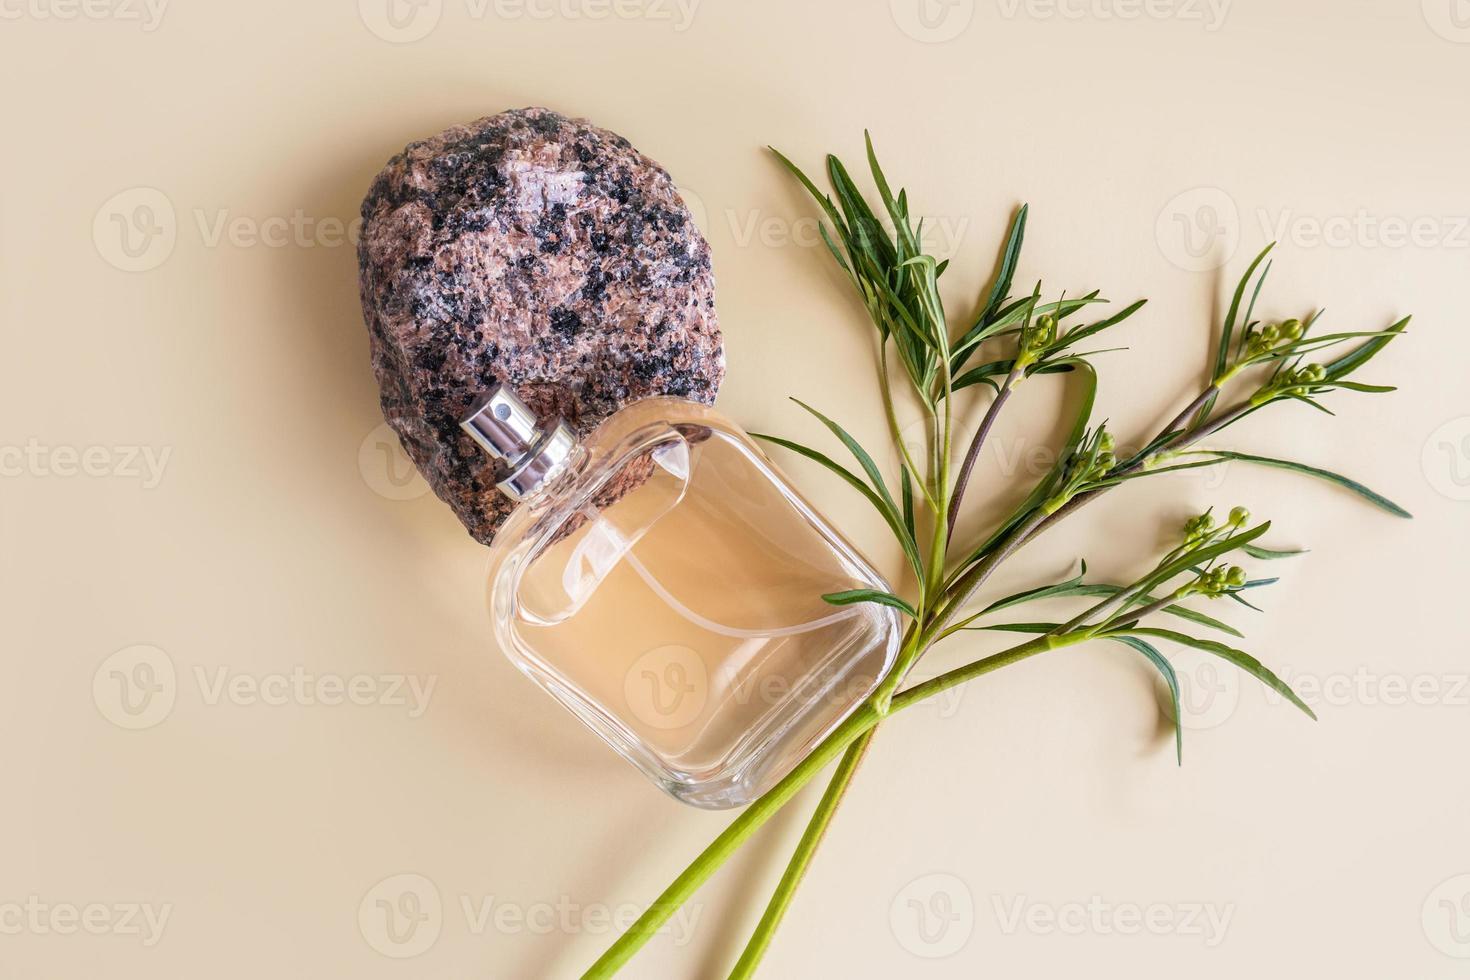 A beautiful glass bottle with men's perfume or toilet water lies on a stone granite on a beige background with green plants. presentation fragrance. photo